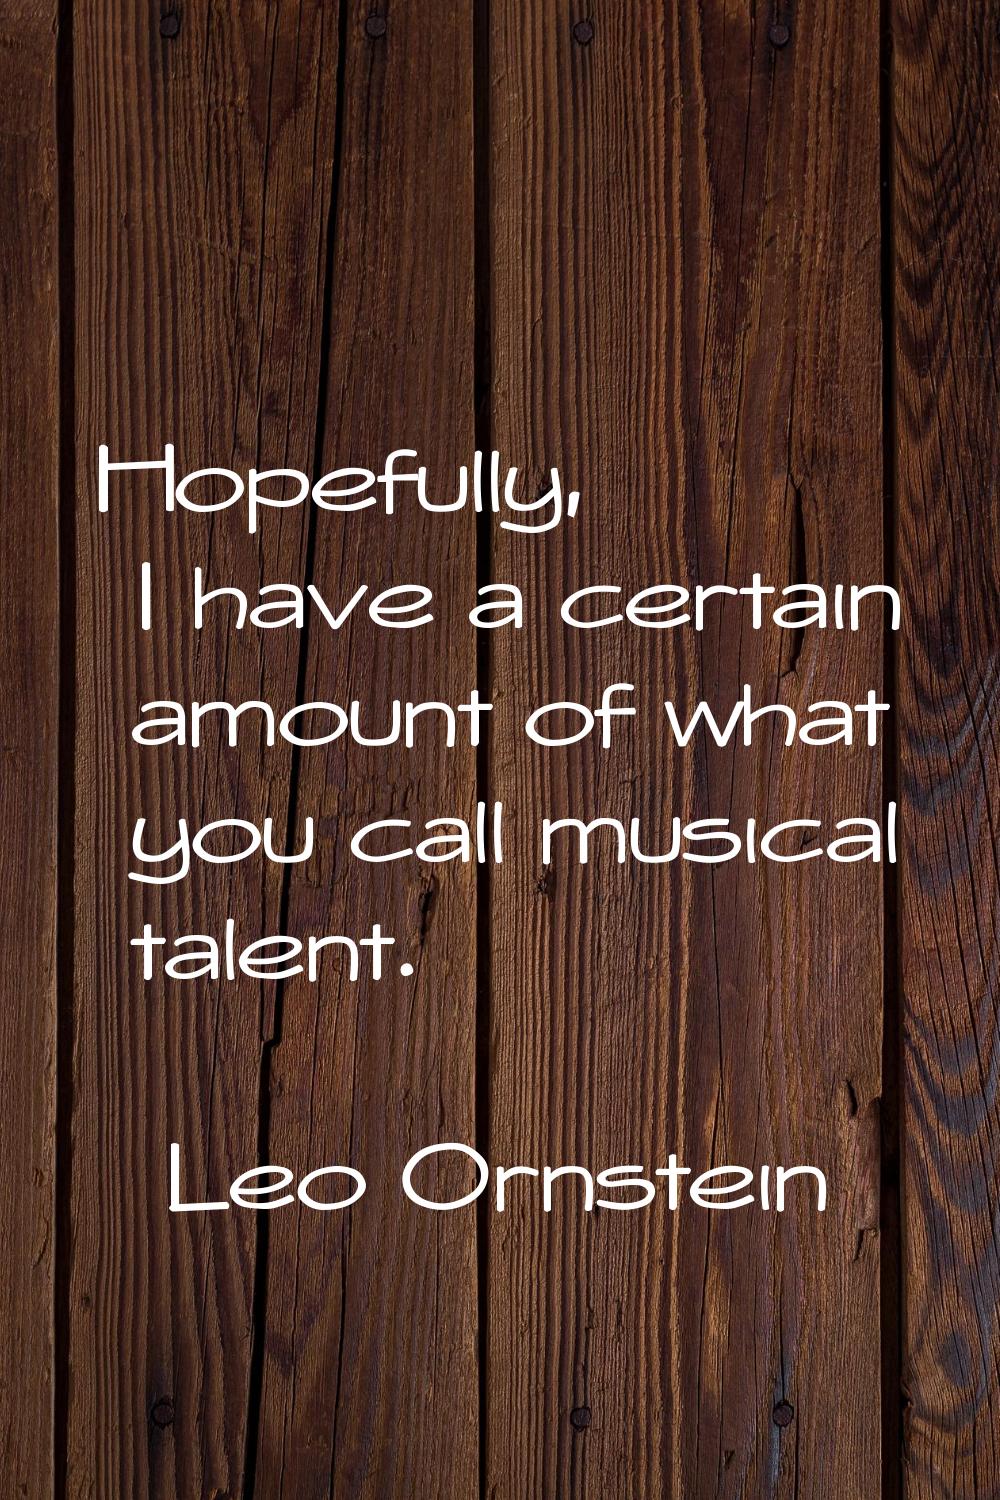 Hopefully, I have a certain amount of what you call musical talent.